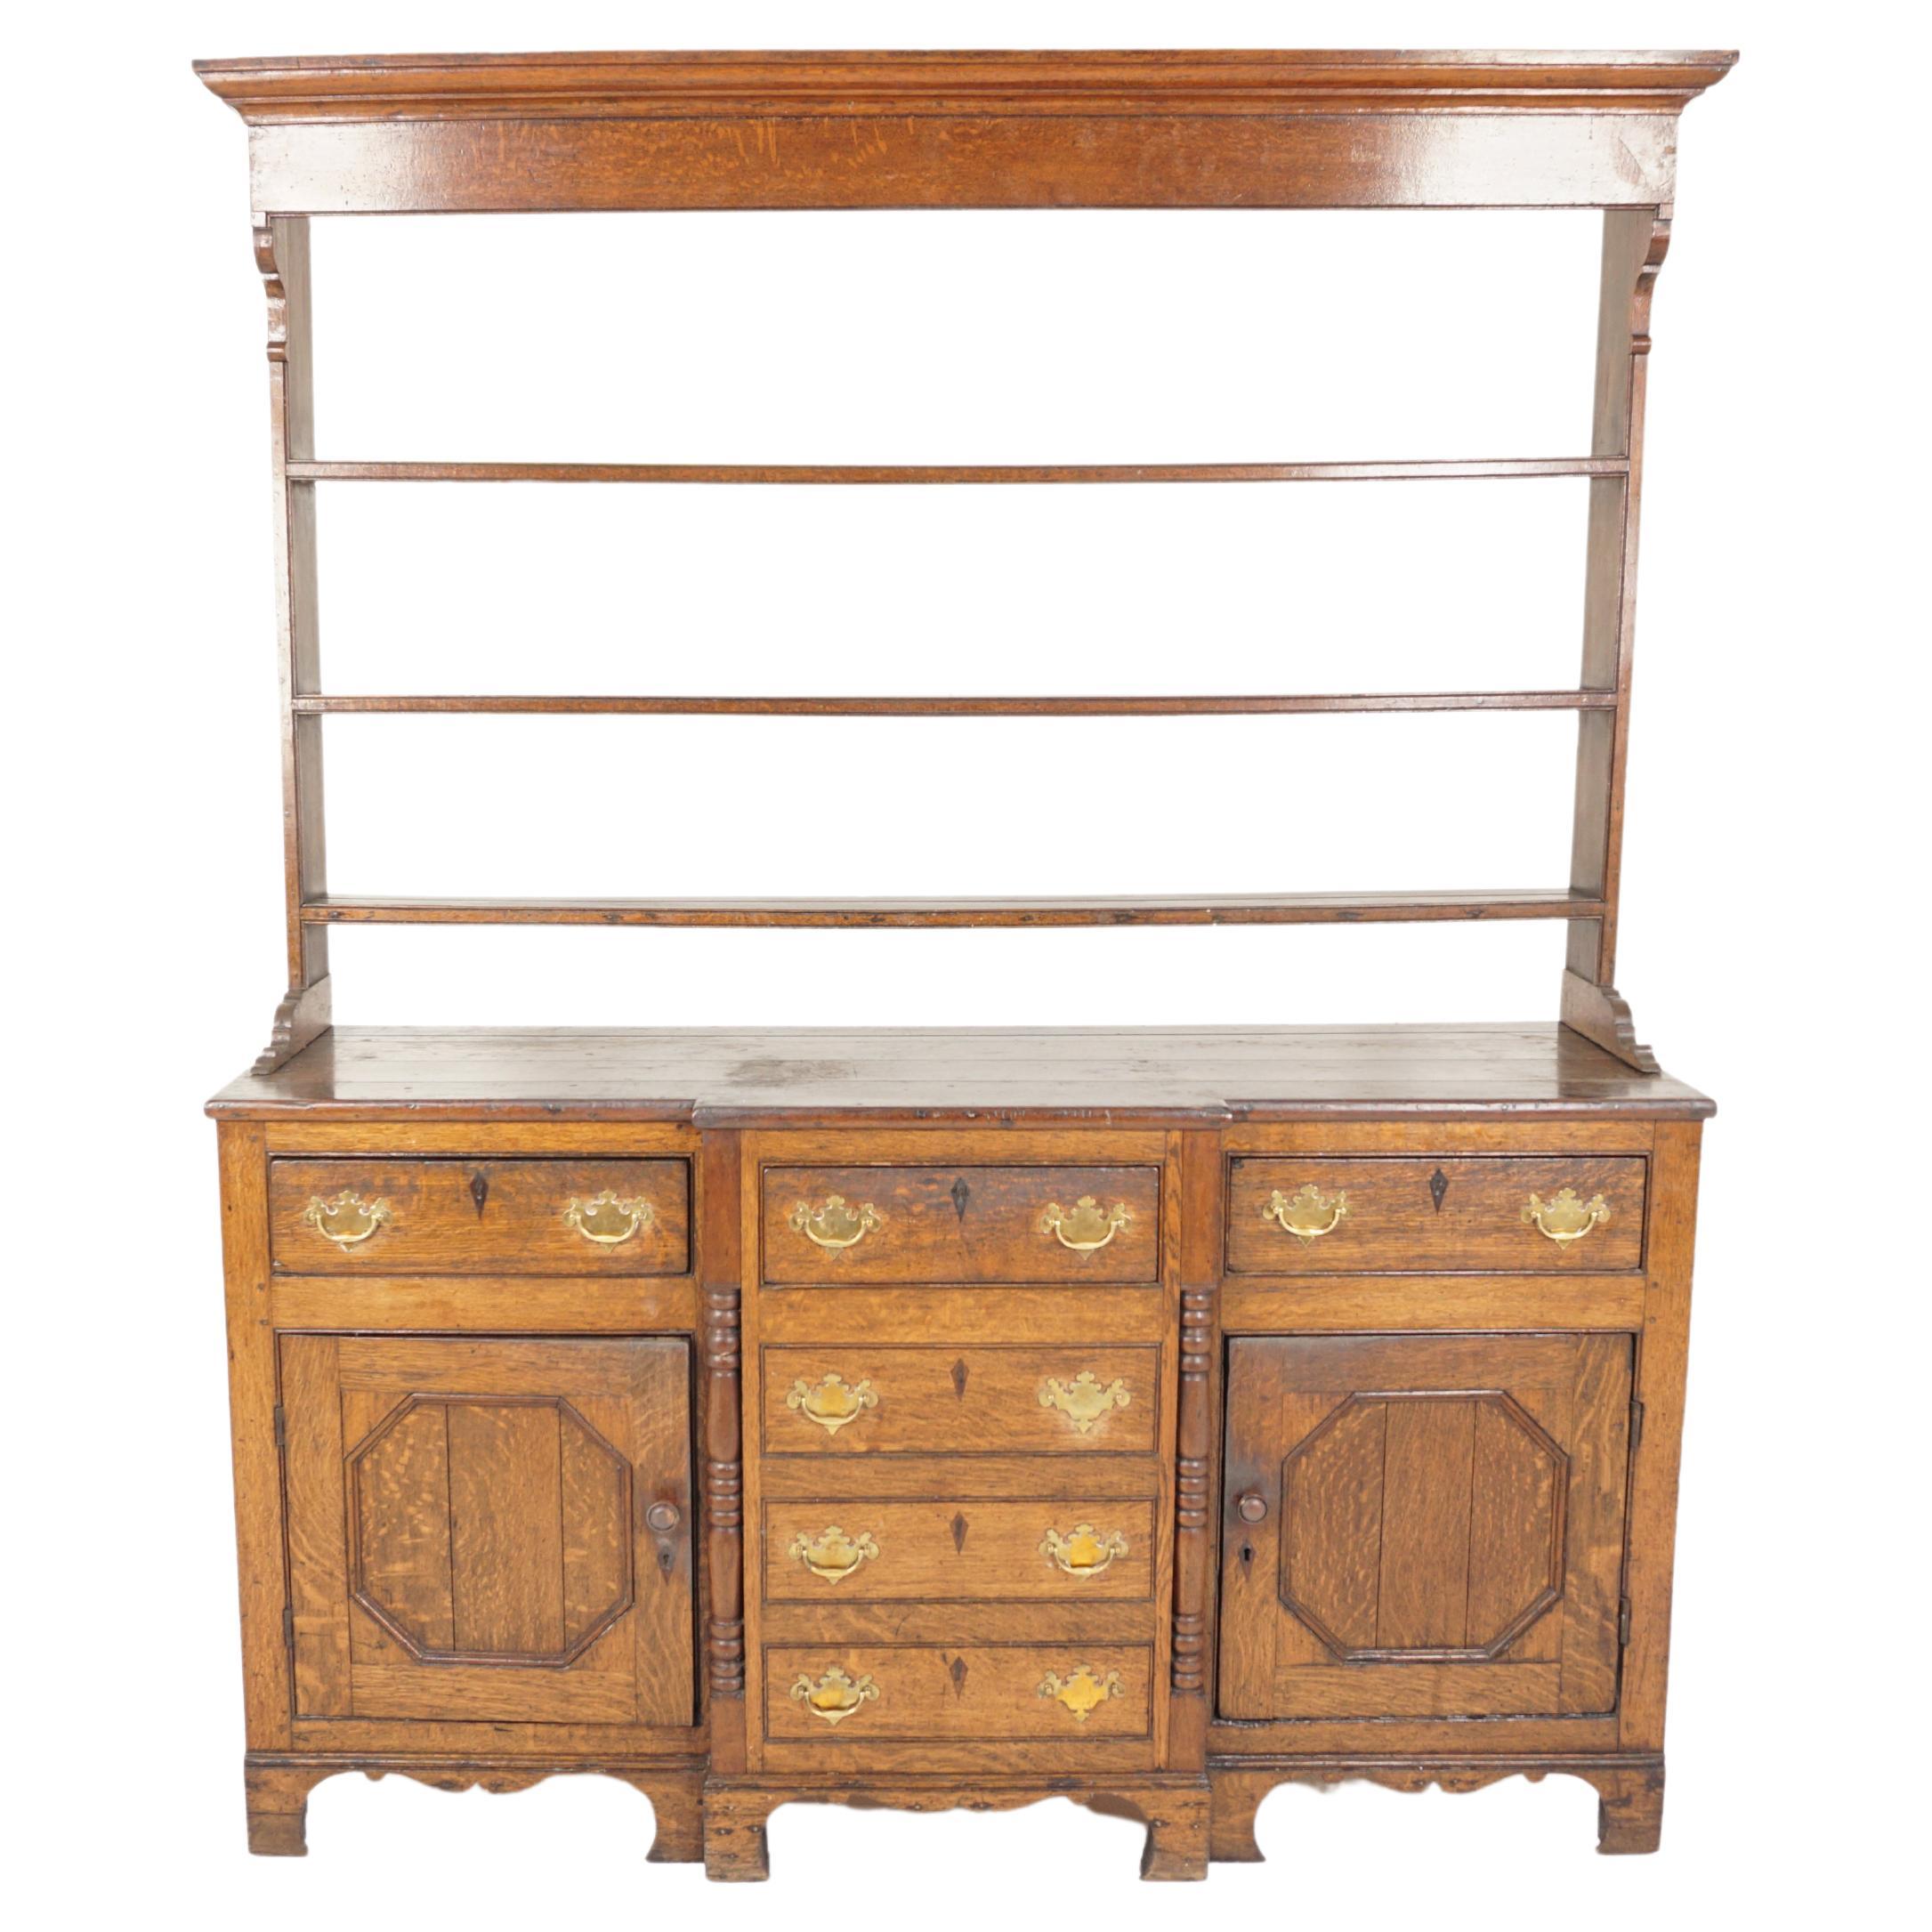 Victorian Oak Welsh Dresser 'Anglesey' Sideboard Buffet & Hutch, Wales 1840 H945 For Sale